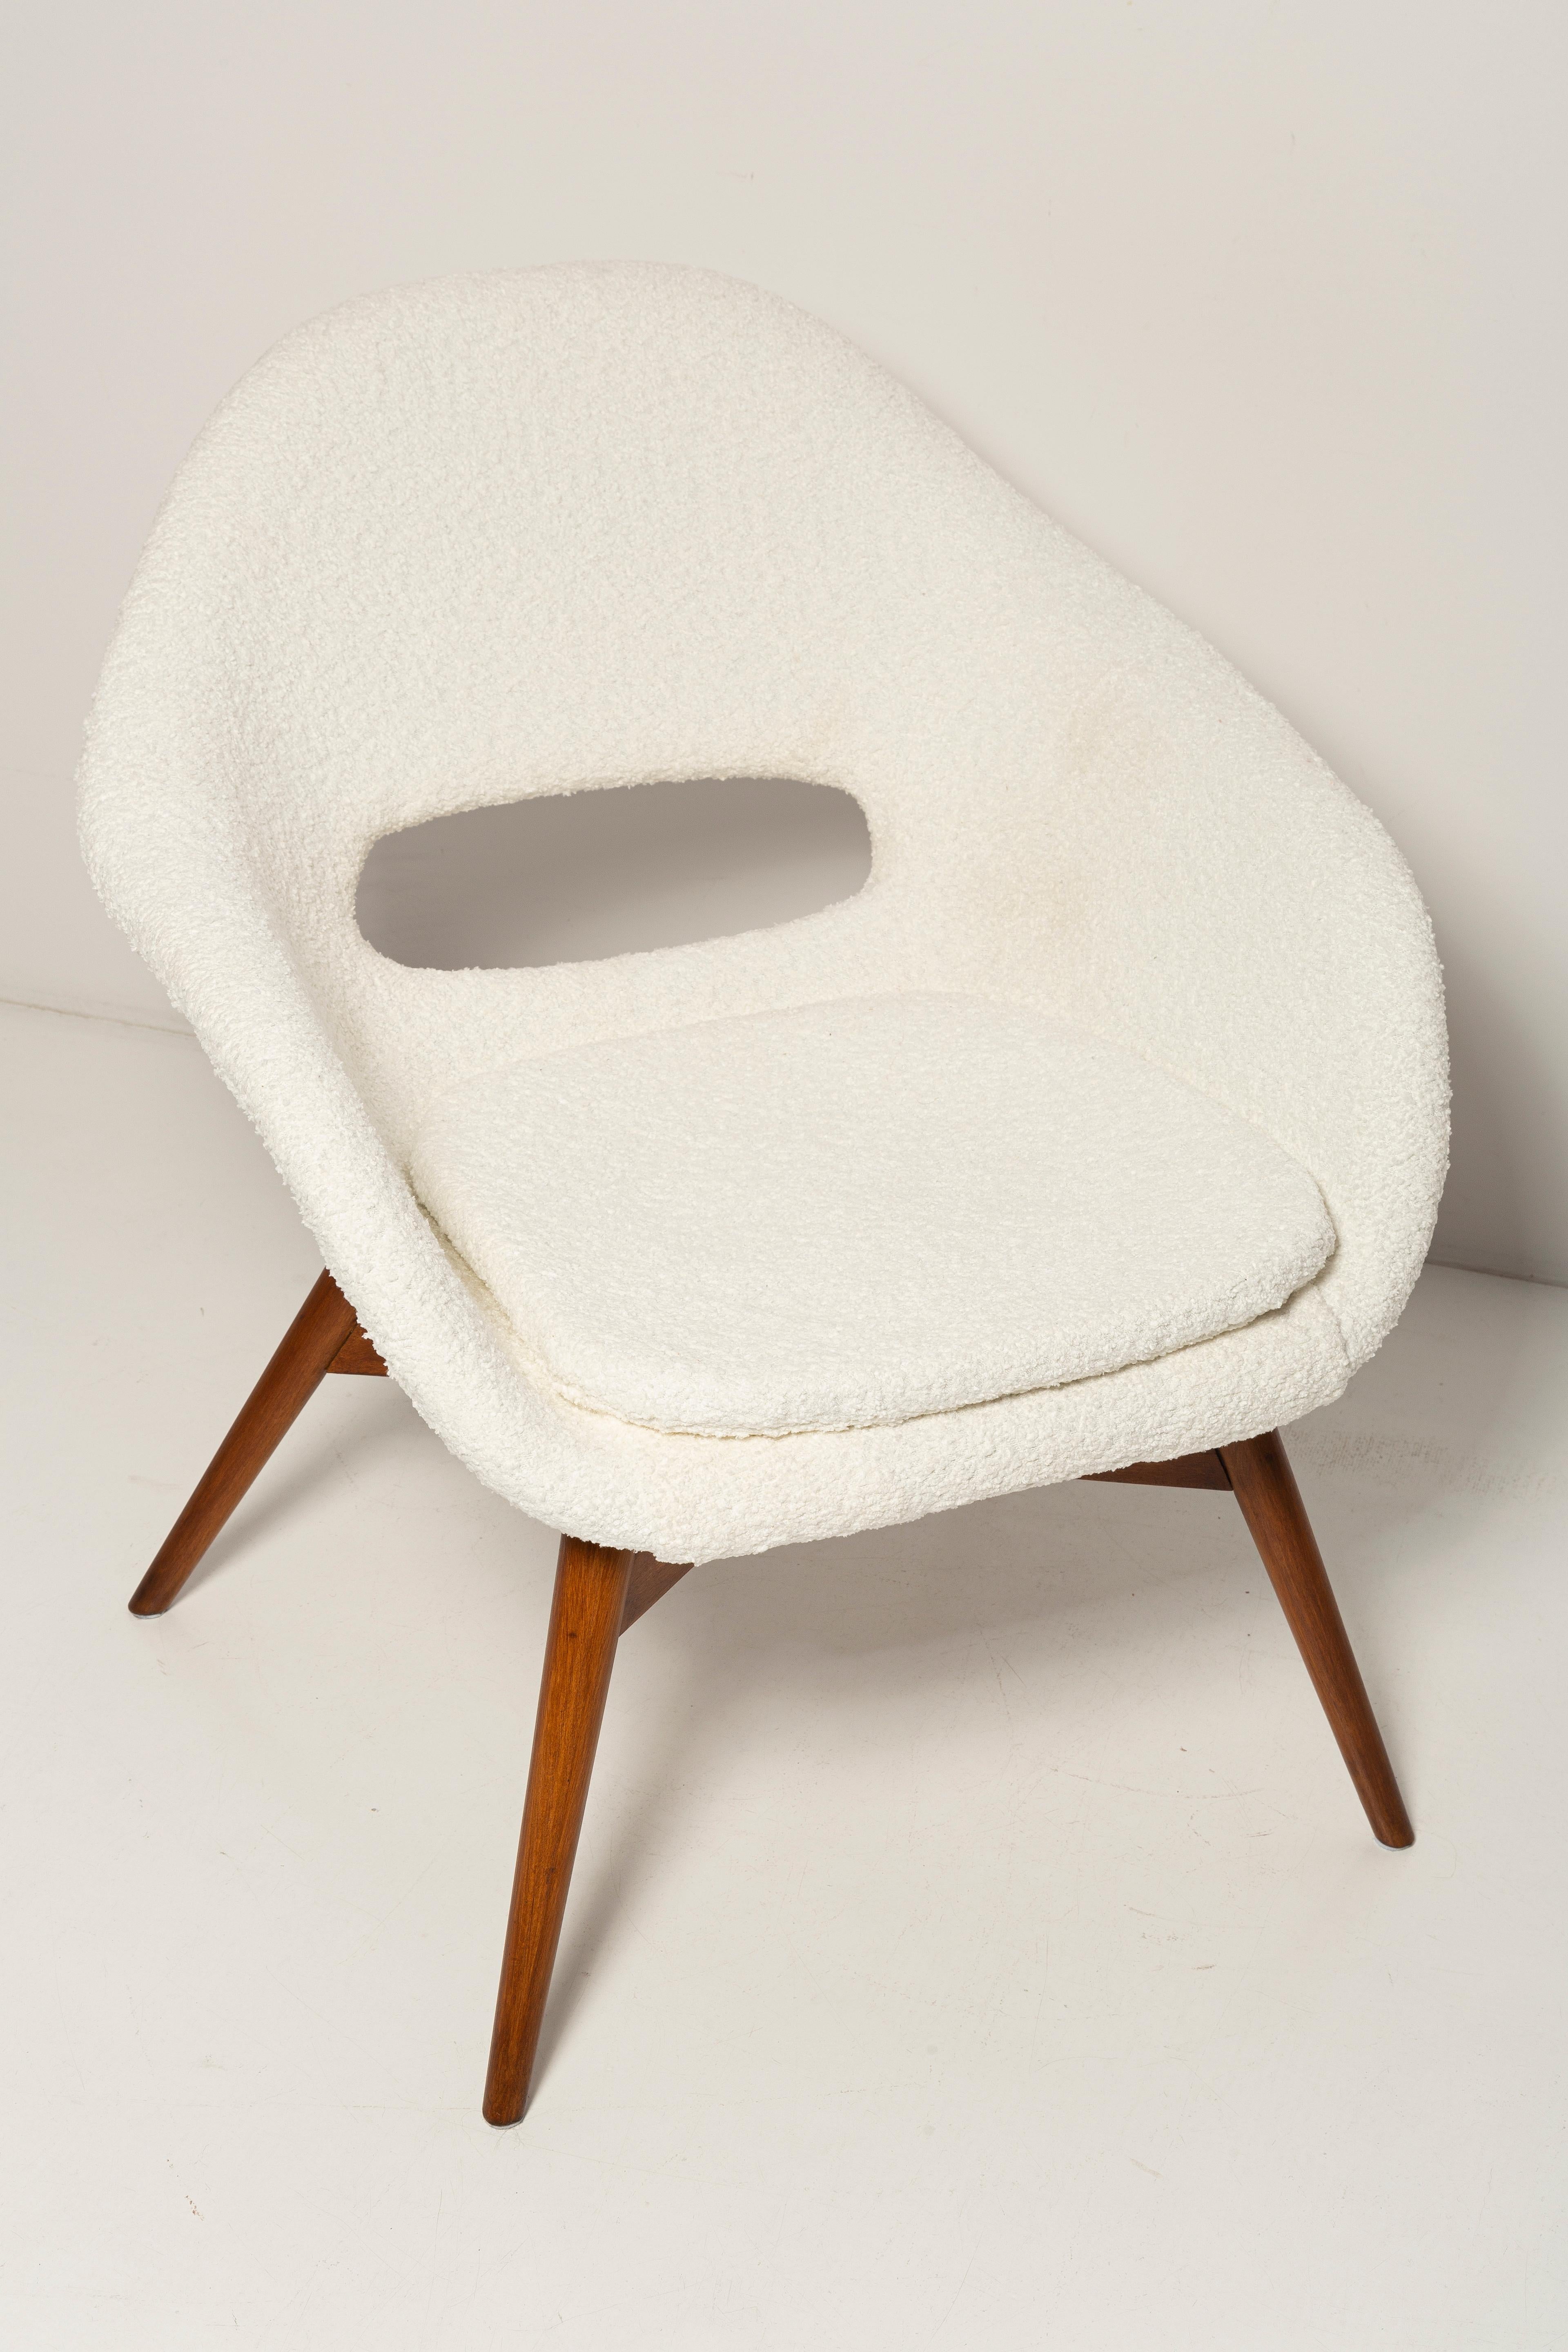 Hand-Crafted Set of 2 Mid Century White Boucle Shell Chairs, M Navratil, Czechoslovakia, 1960 For Sale